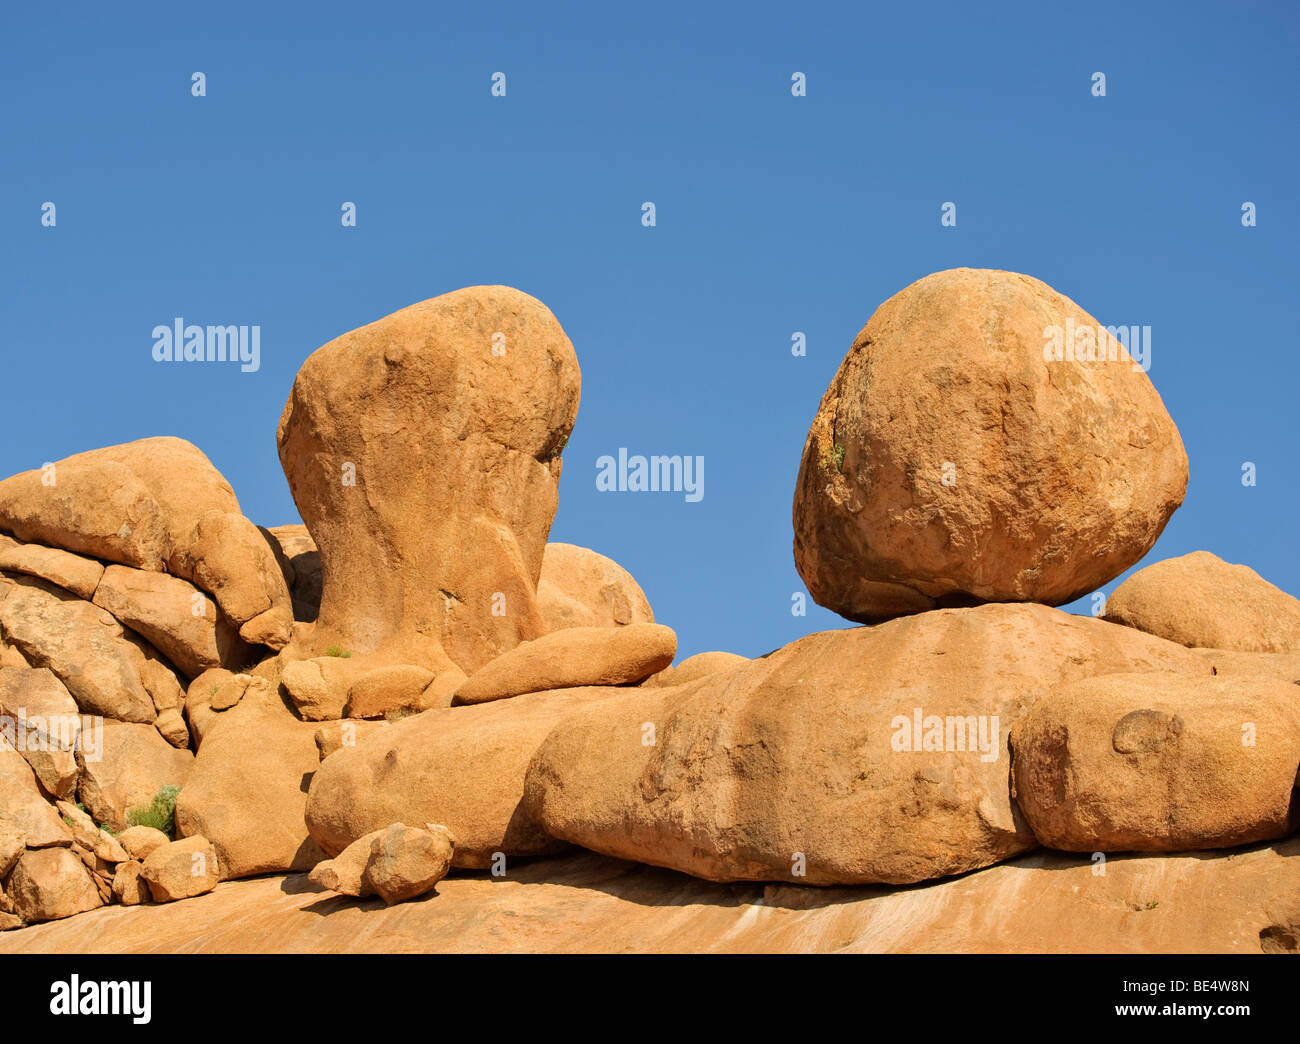 Wollsack weathering of granite in 'Bushman's Paradise' at the Spitzkoppe, Namibia, Africa Stock Photo